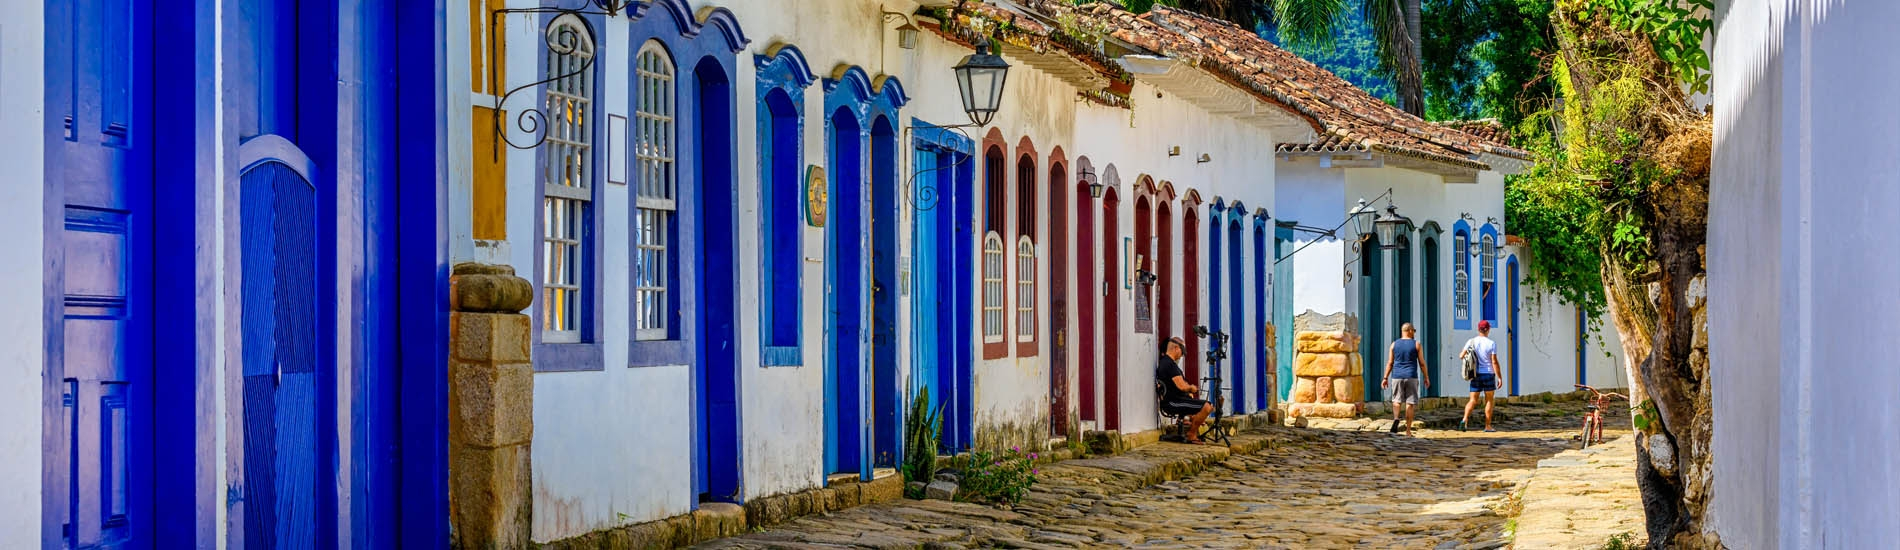 Tradictional street in the Paraty village